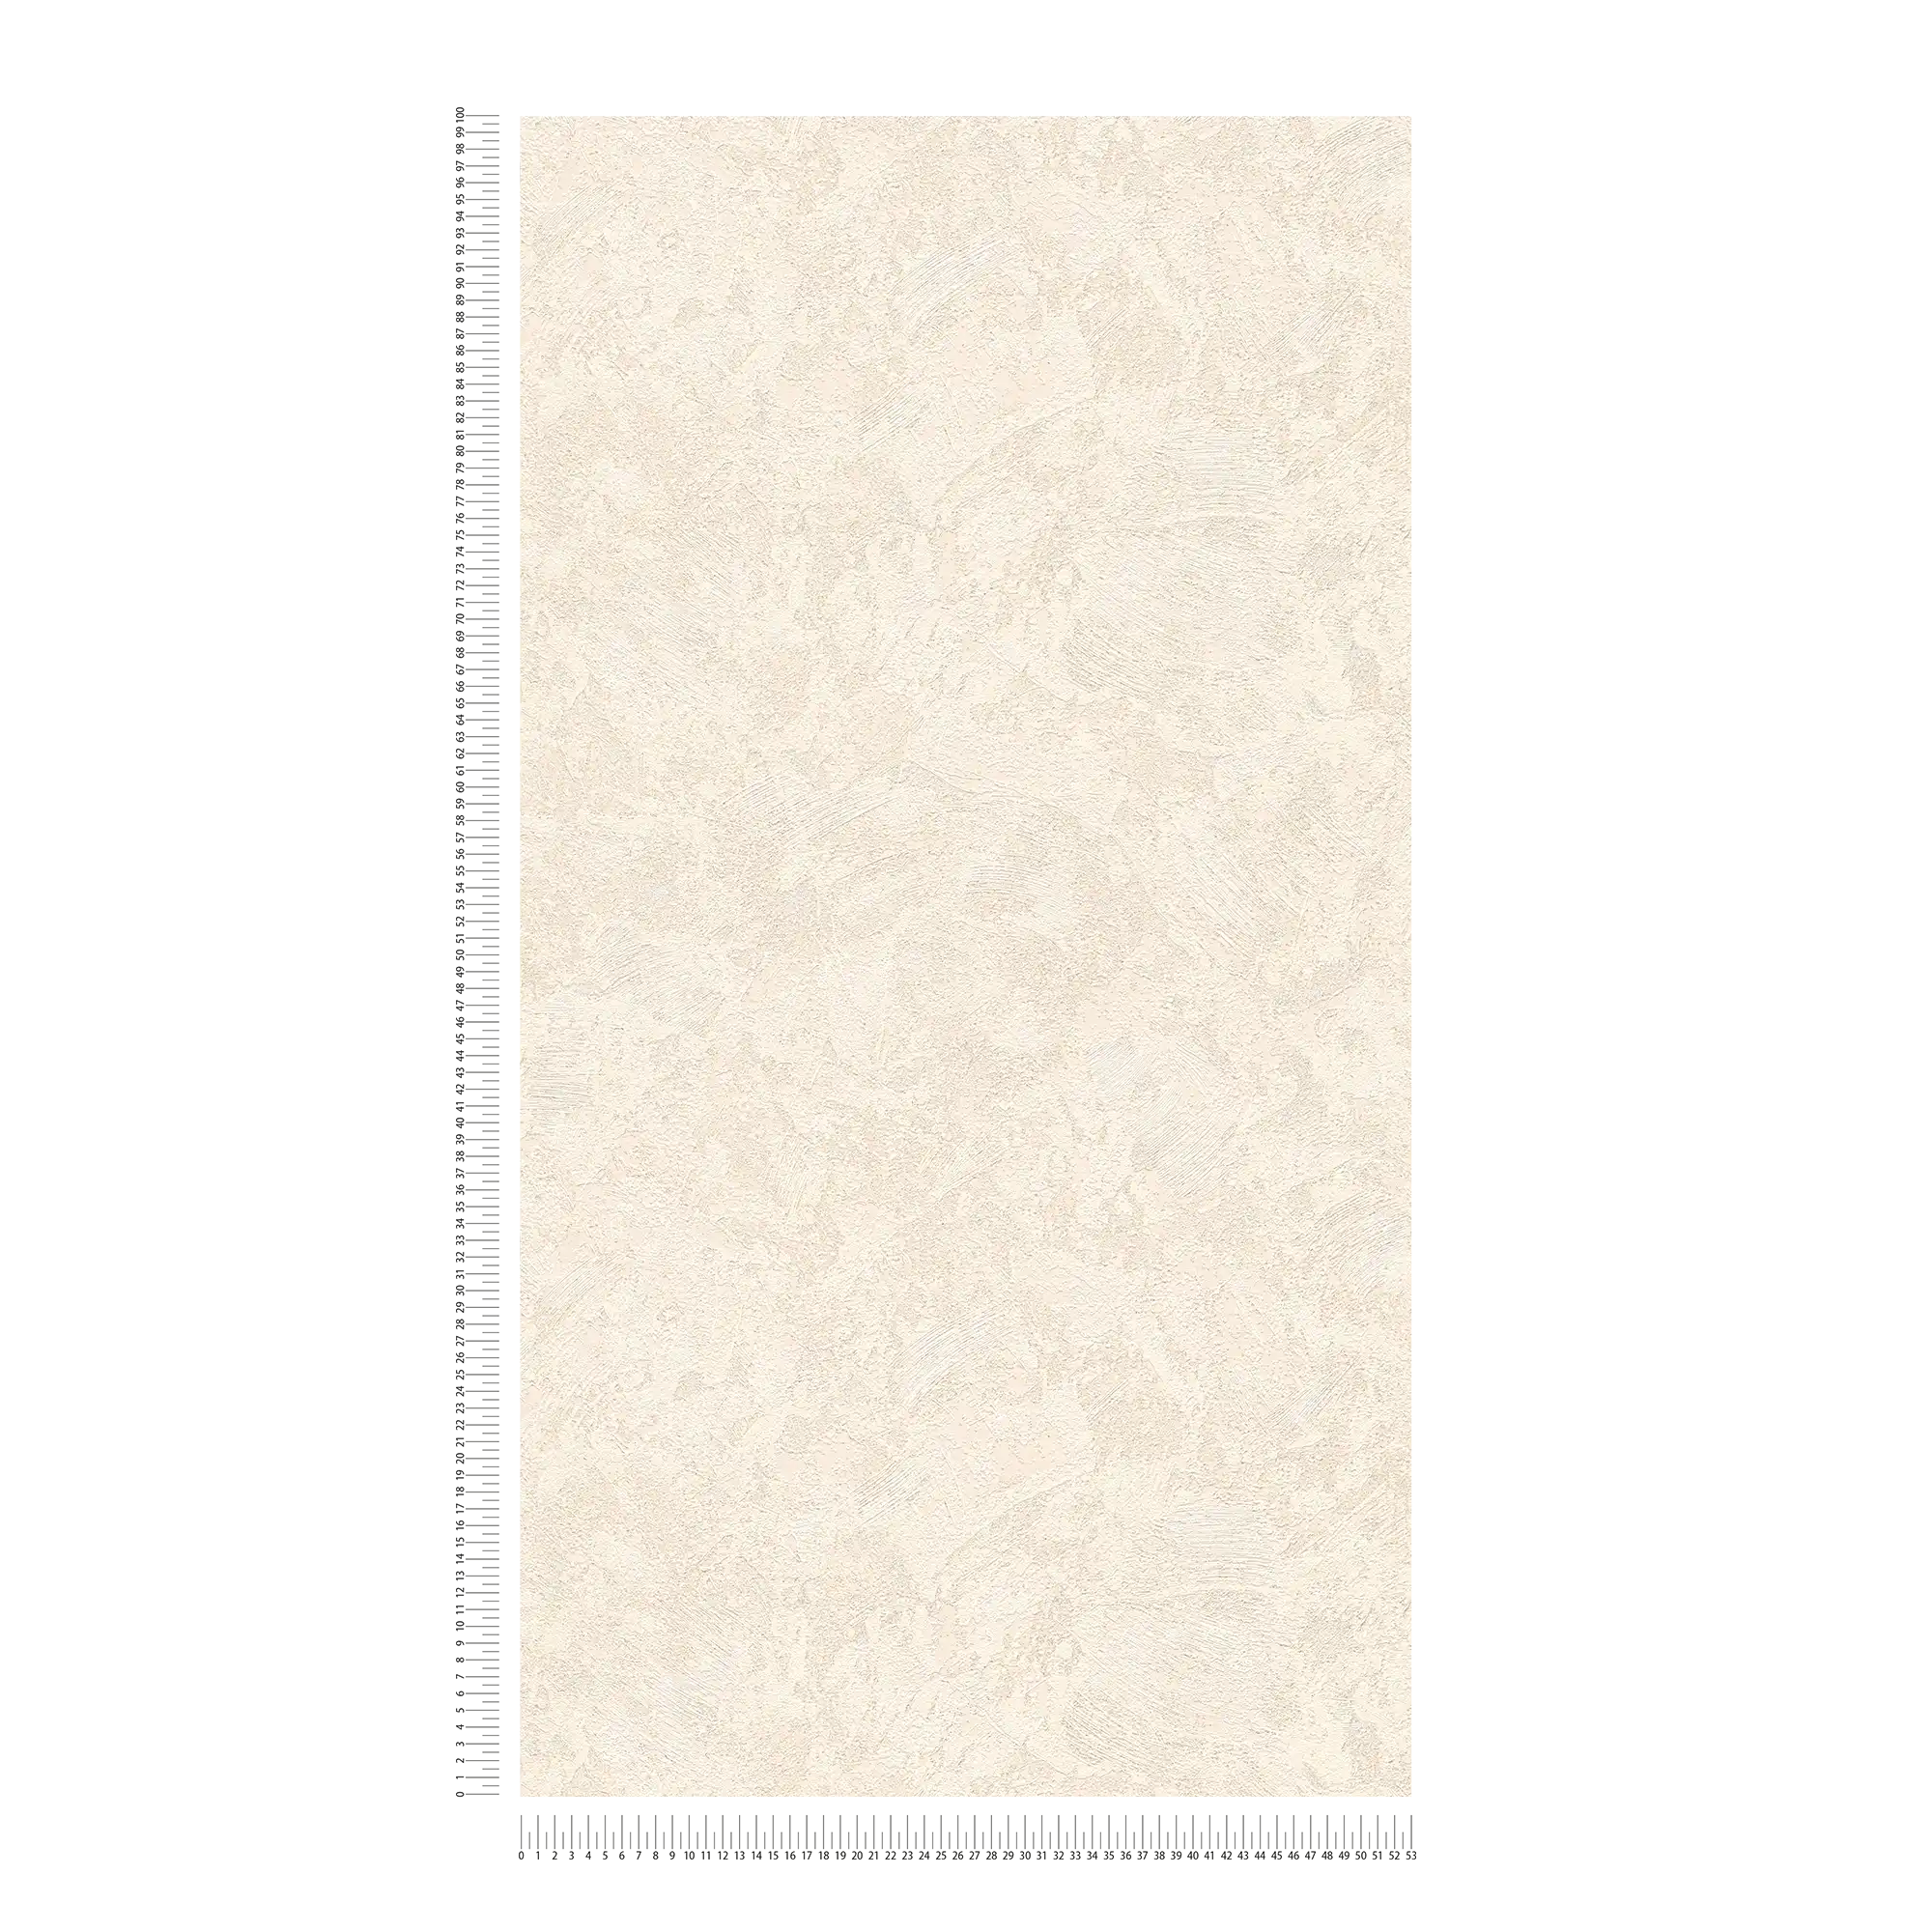             Non-woven wallpaper plaster look with roughcast texture - cream
        